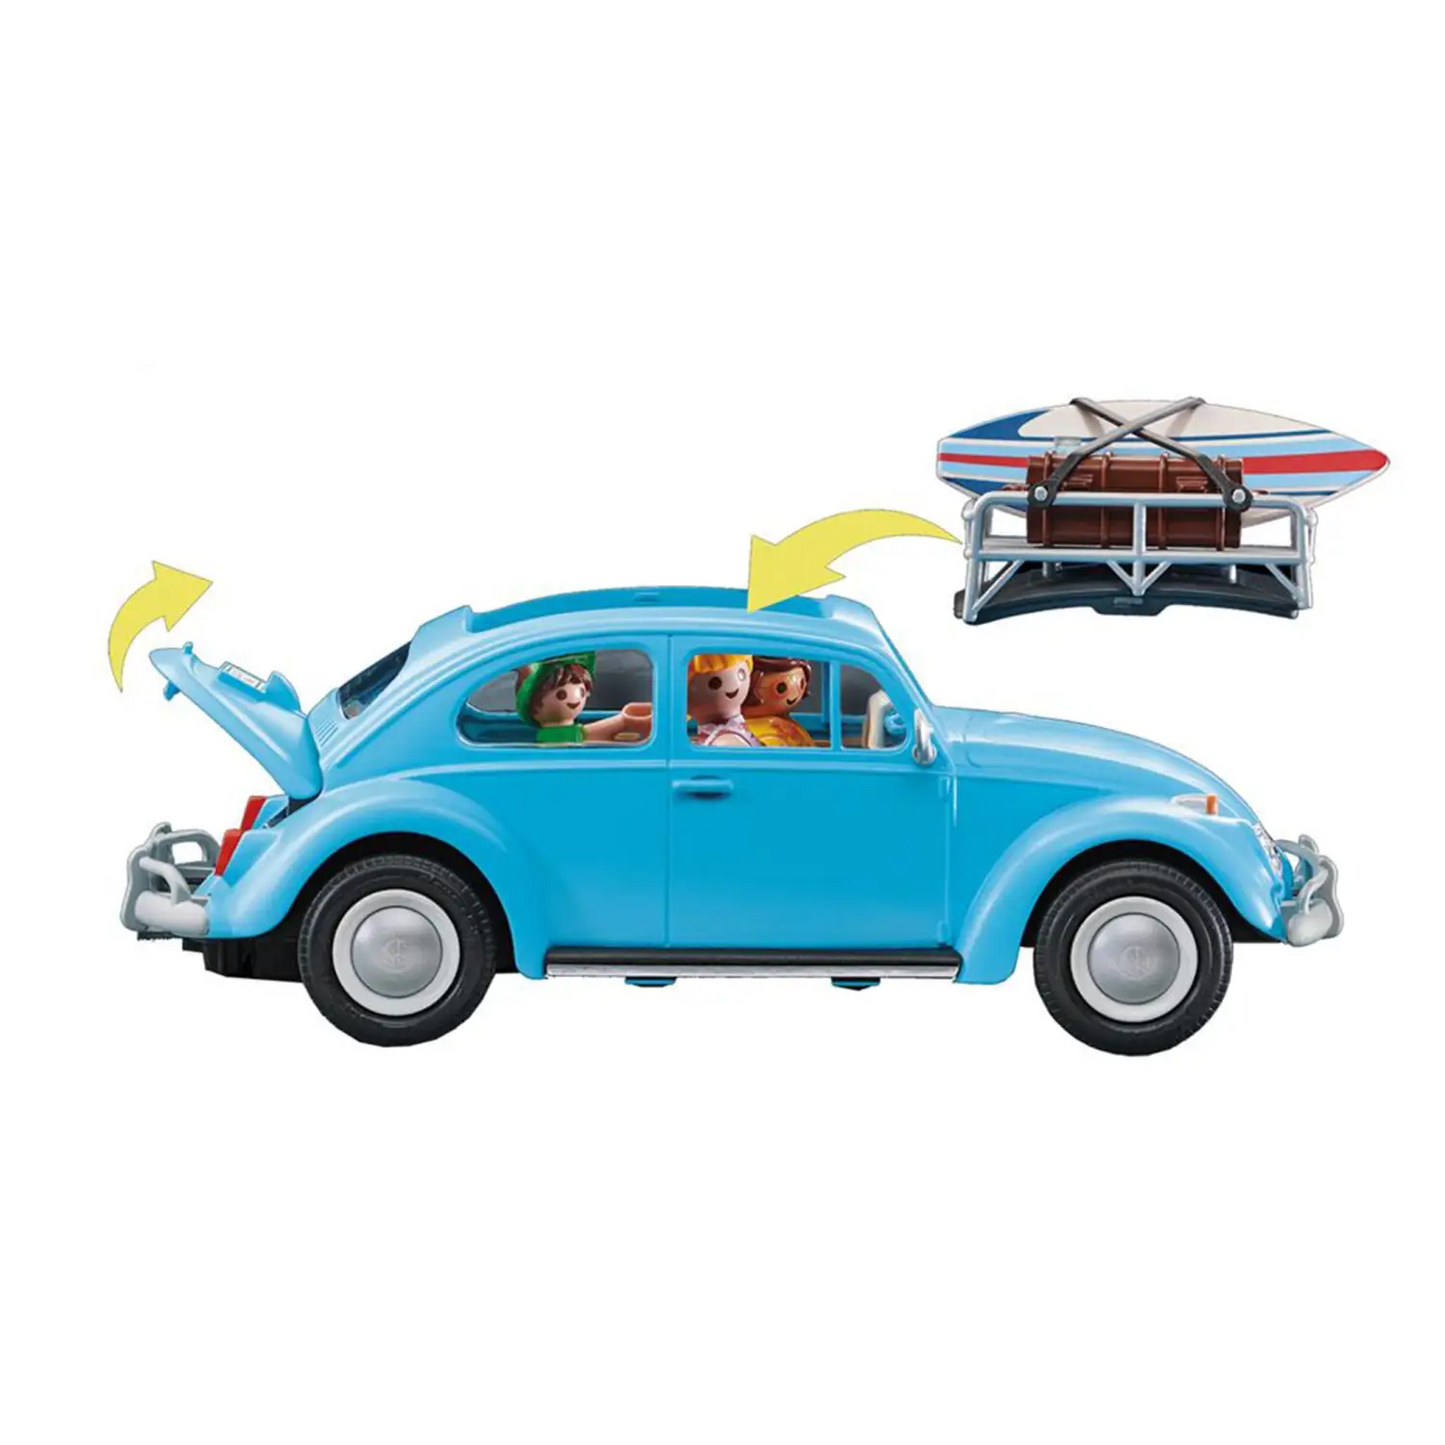 Playmobil Volkswagen Beetle 70177 (for kids 5 yrs old and up